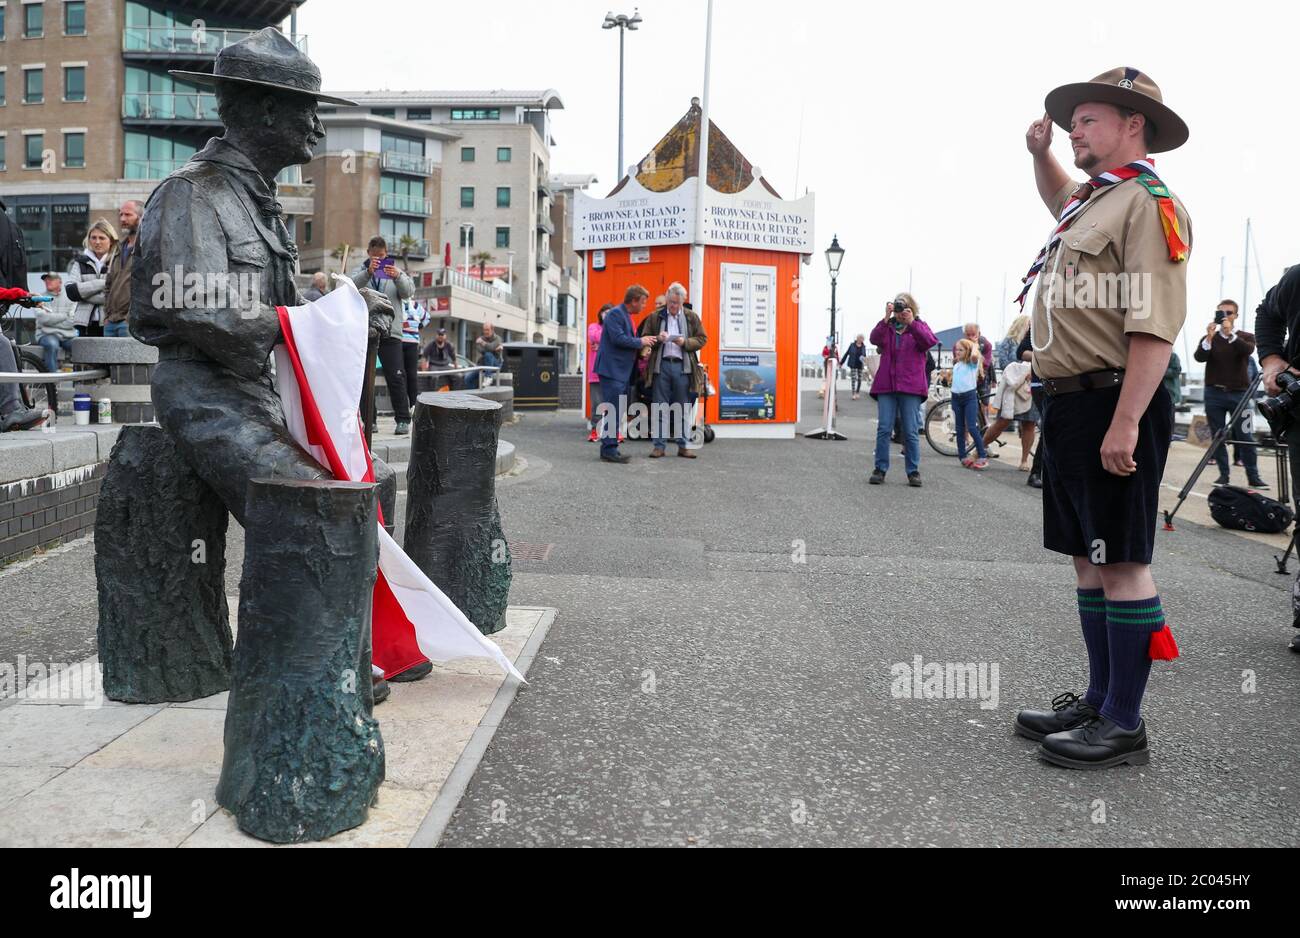 Rover Scout Matthew Trott salutes a statue of Robert Baden-Powell on Poole Quay in Dorset ahead of its expected removal to 'safe storage' following concerns about his actions while in the military and 'Nazi sympathies'. The action follows a raft of Black Lives Matter protests across the UK, sparked by the death of George Floyd, who was killed on May 25 while in police custody in the US city of Minneapolis. Stock Photo